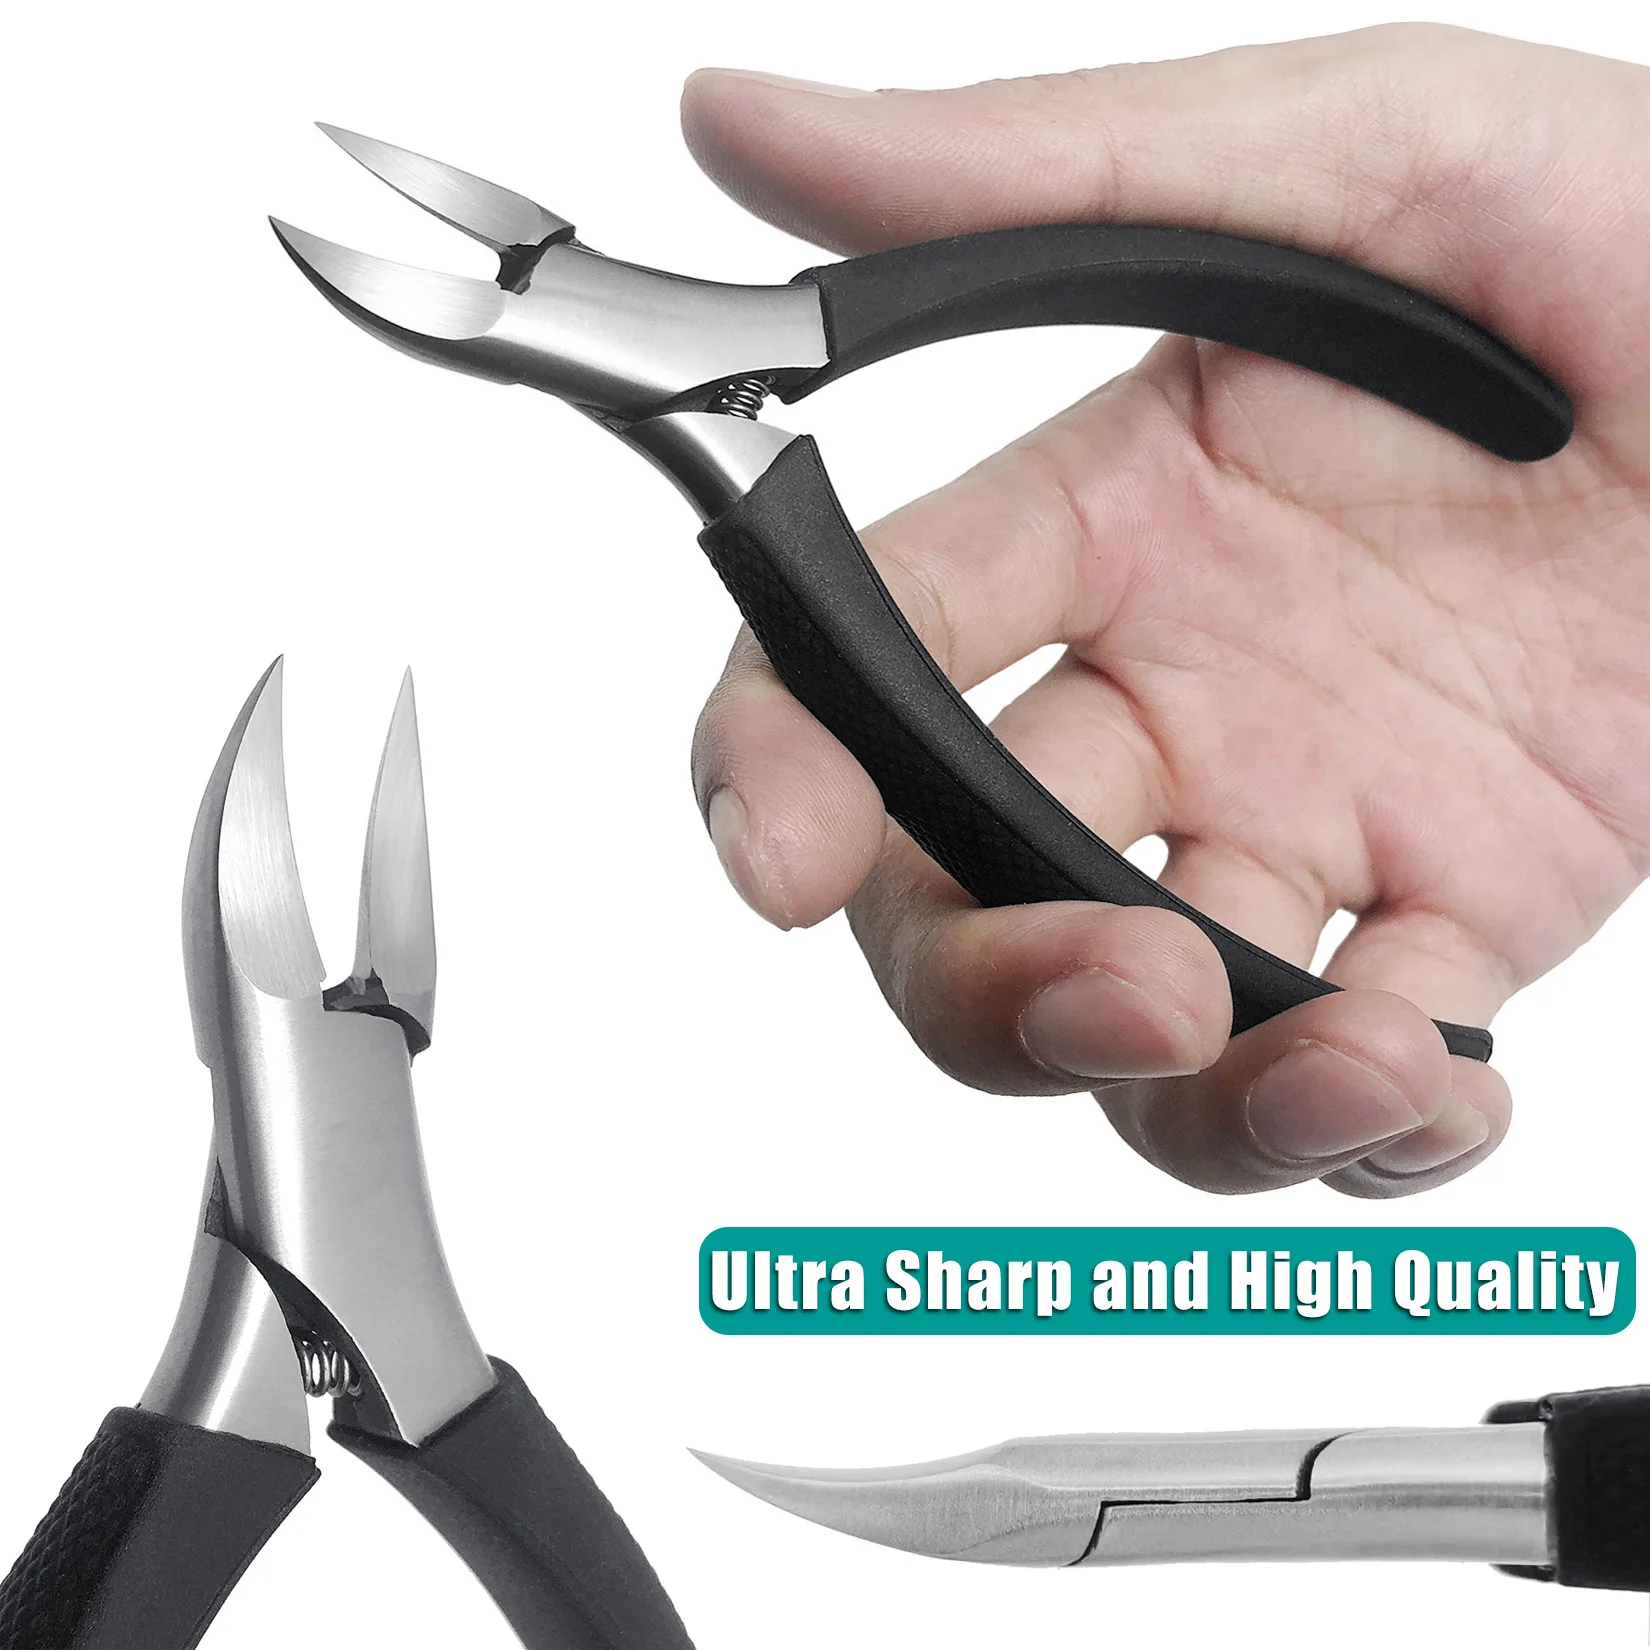 https://ae01.alicdn.com/kf/S75c71d008f3b47579437ff8d7f8c8c7cE/SGNEKOO-Toenail-Clippers-for-Hard-Thick-Nails-Ingrown-Cutter-Scissors-Trimmer-Pedicure-Tool-Paronychia-Podiatrist-Adults.jpg